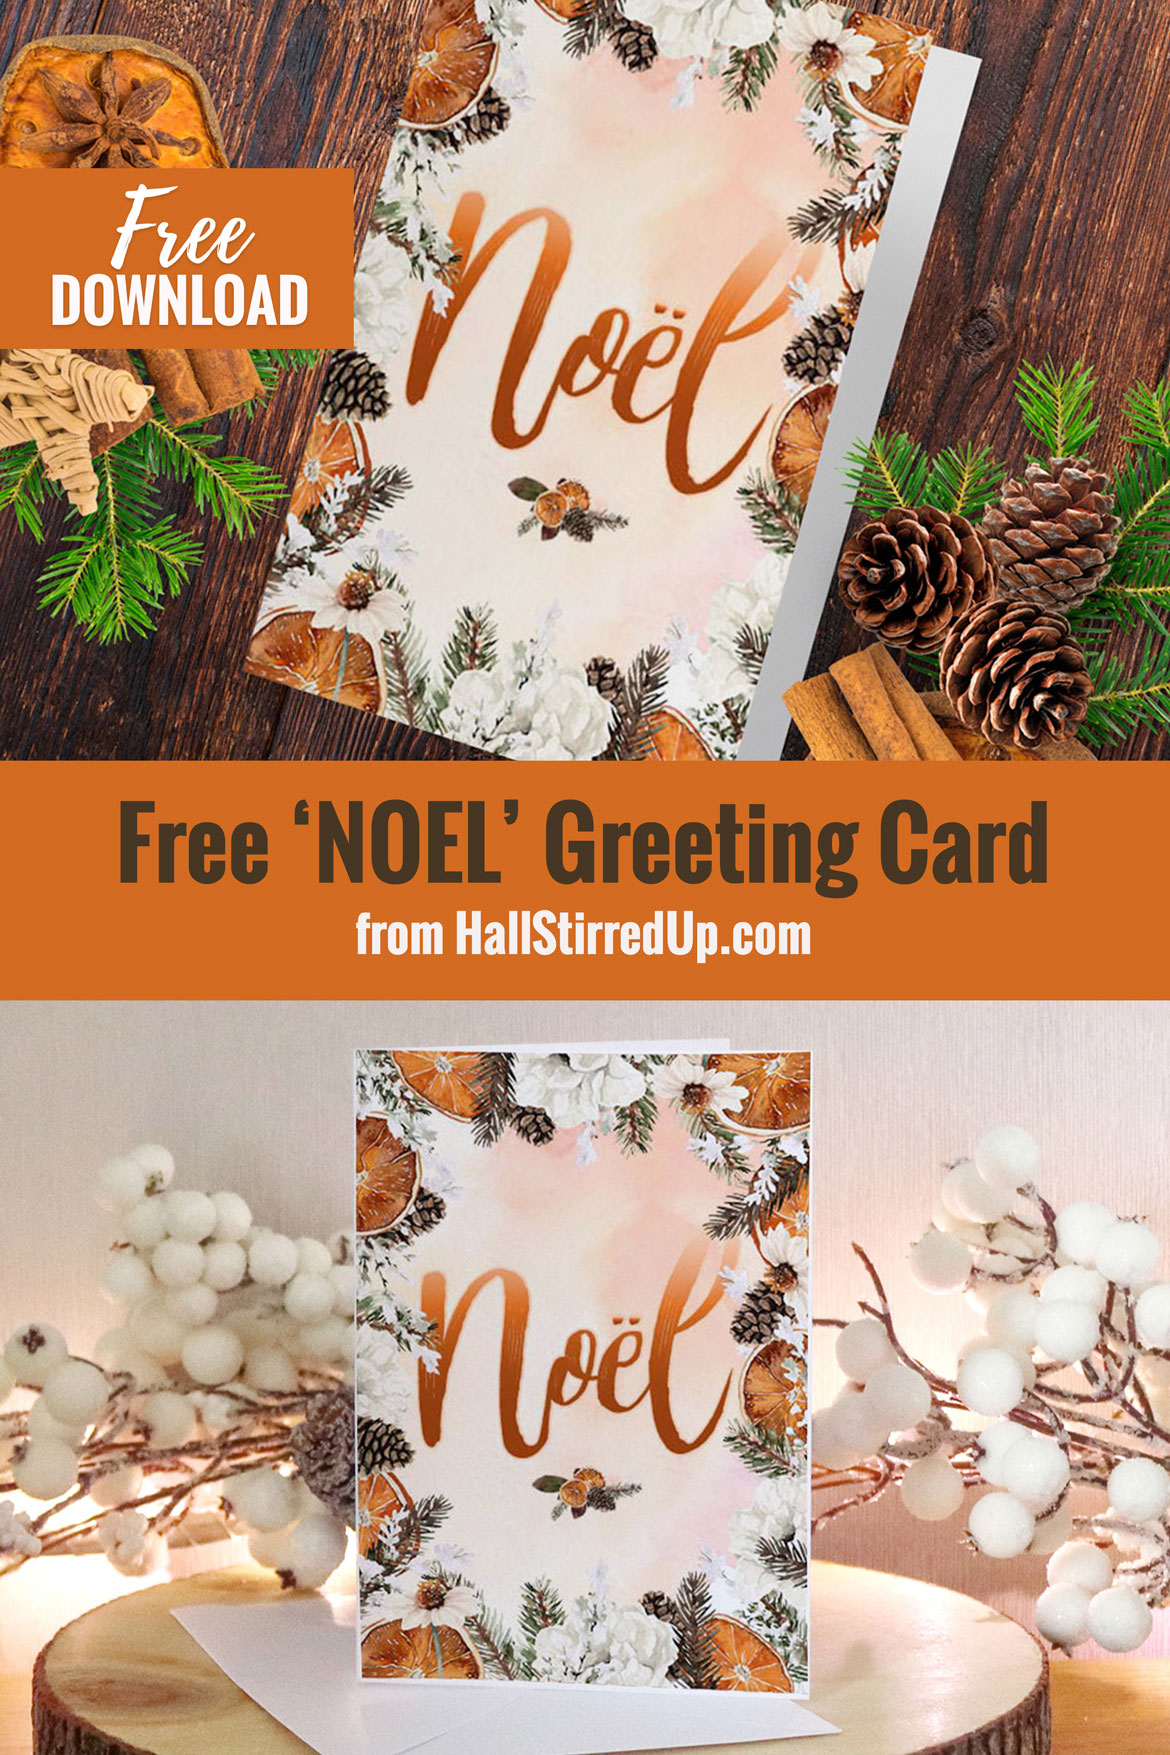 Send Christmas greetings with a pretty Noel greeting card